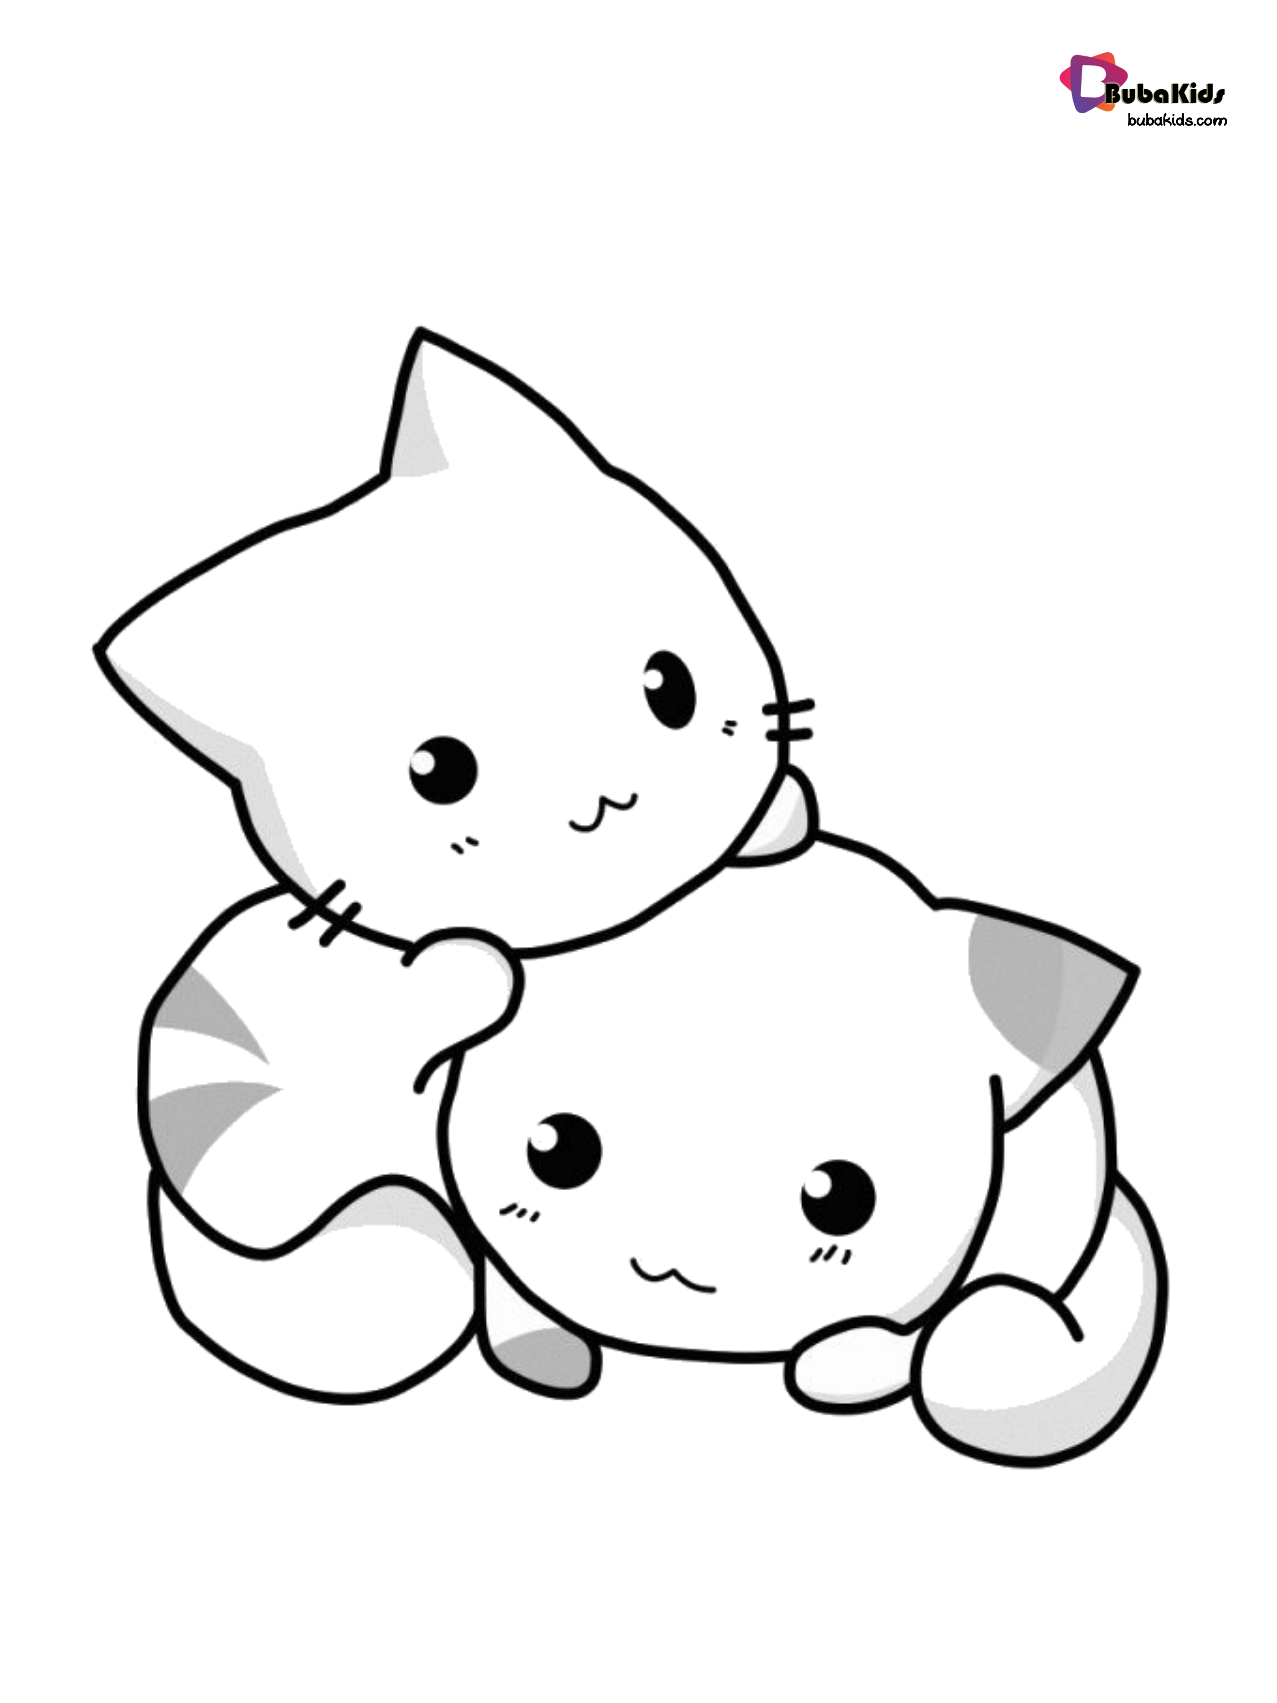 Cute kittens coloring pages